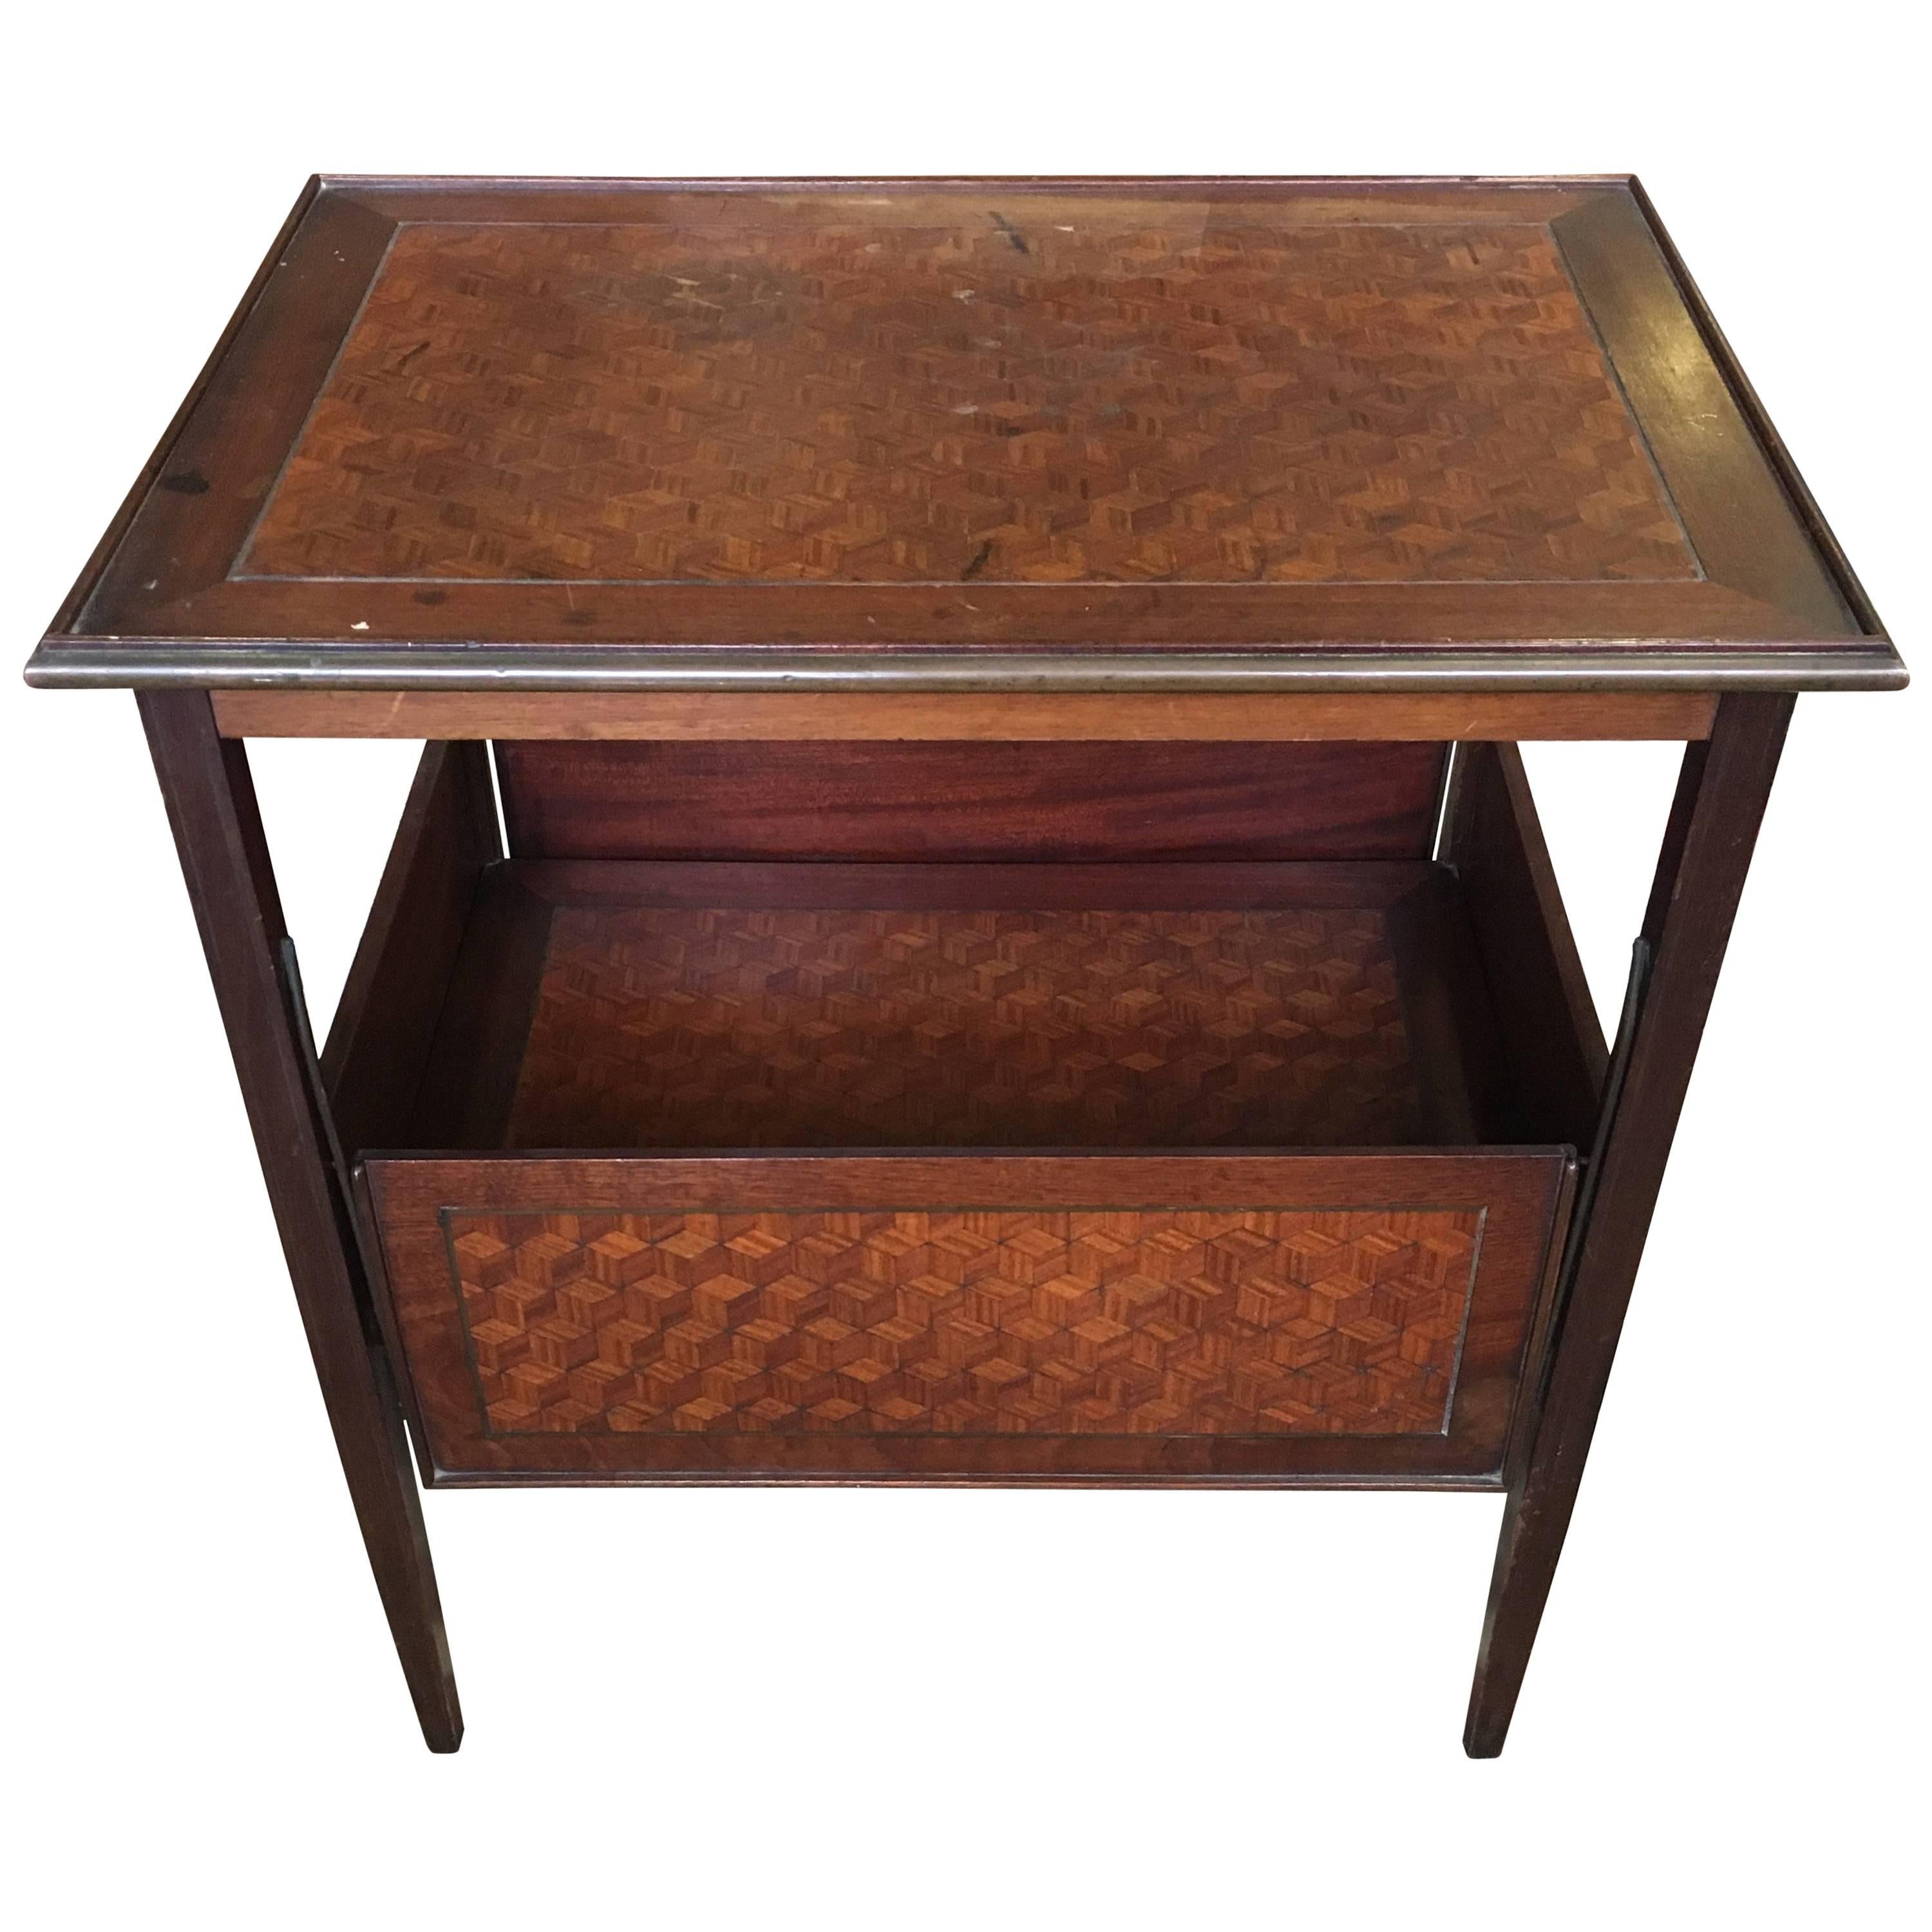 19th Century French Serving Marquetry Table with Sliding Panels